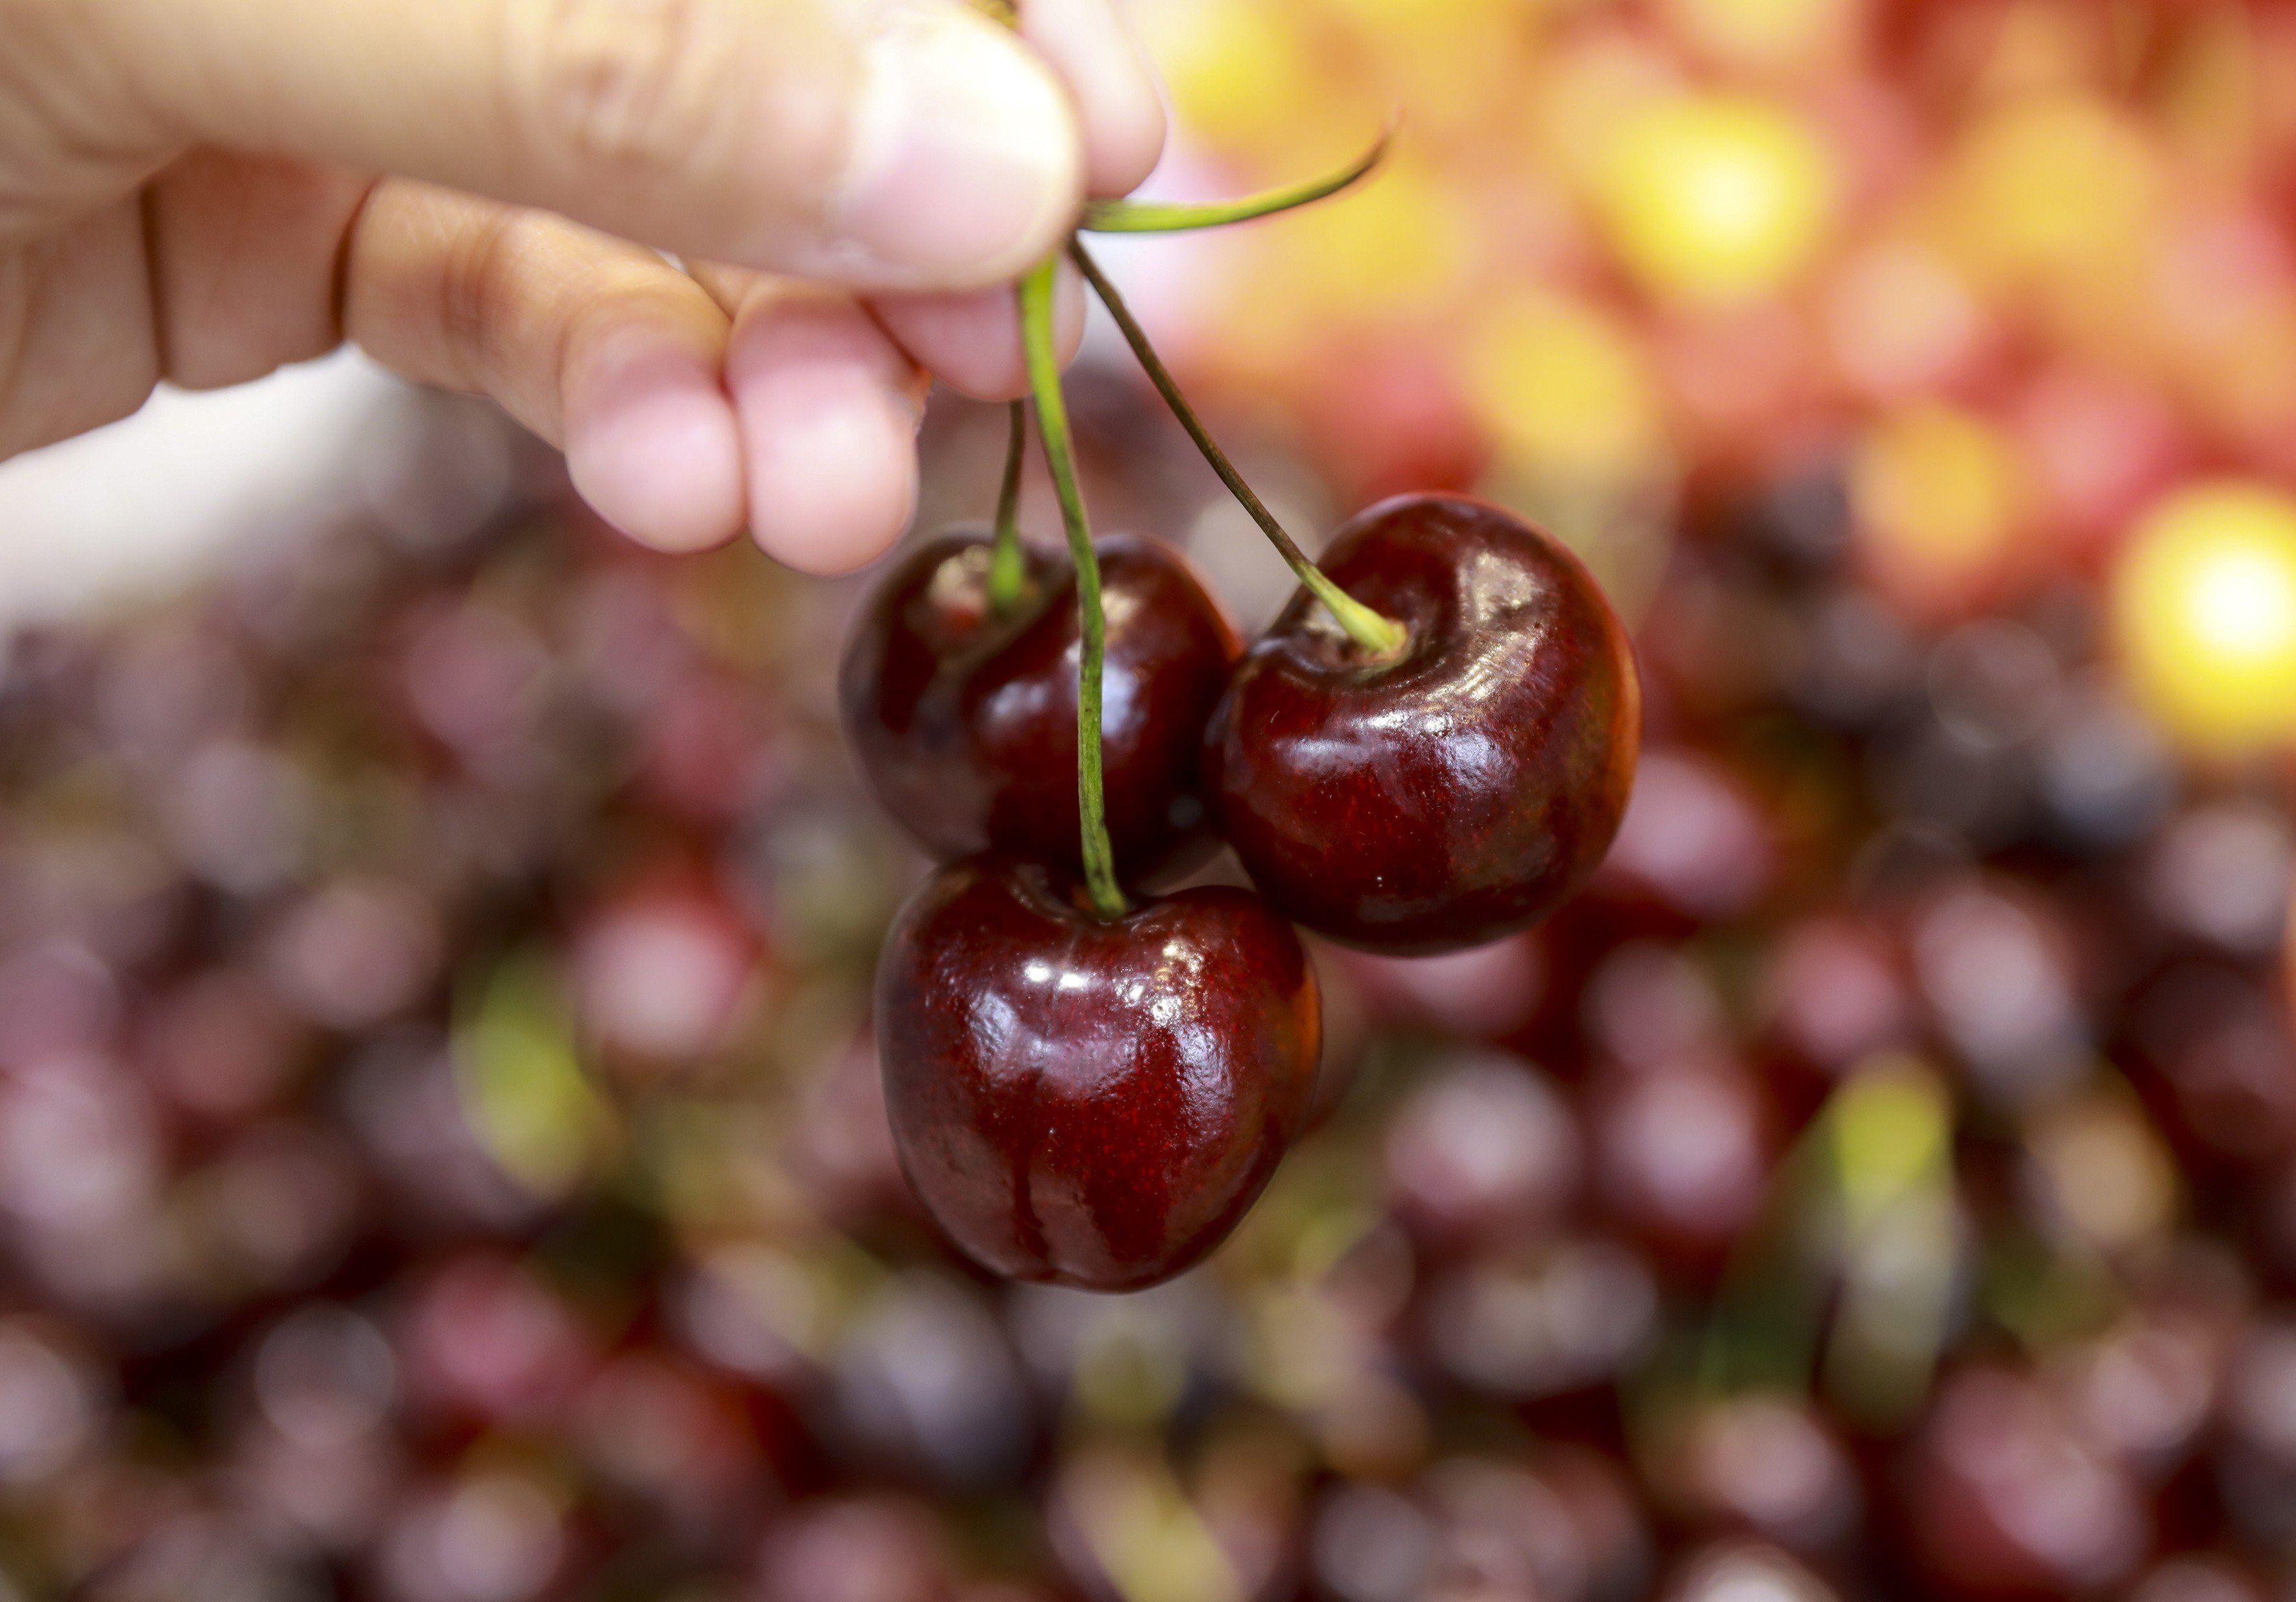 Cherries from the United States. Photo: May Tse